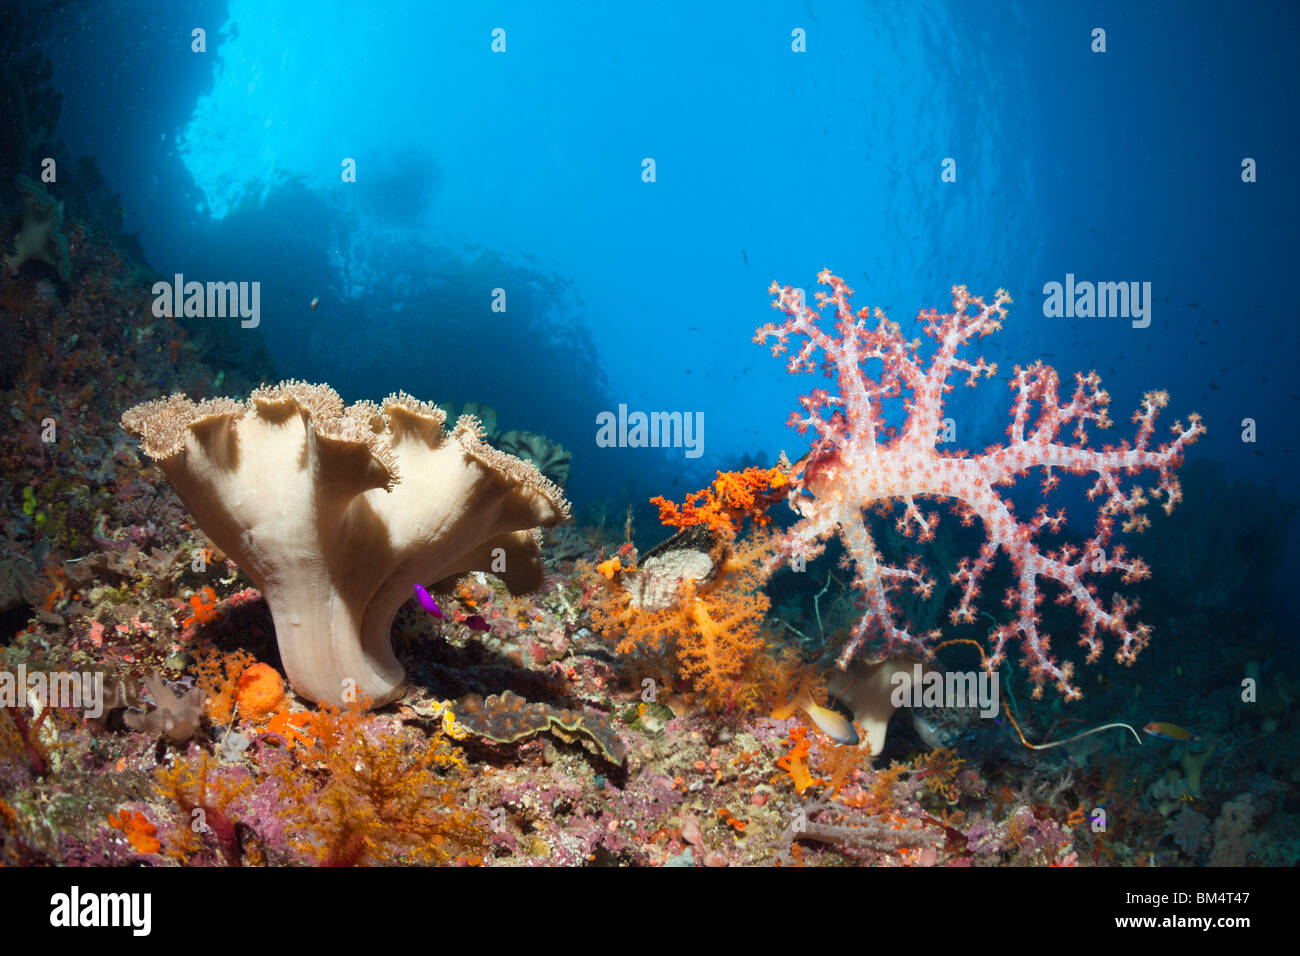 Mushroom Leather Coral and Soft Corals, Sarcophyton sp., Dendronephthya sp., Raja Ampat, West Papua, Indonesia Stock Photo